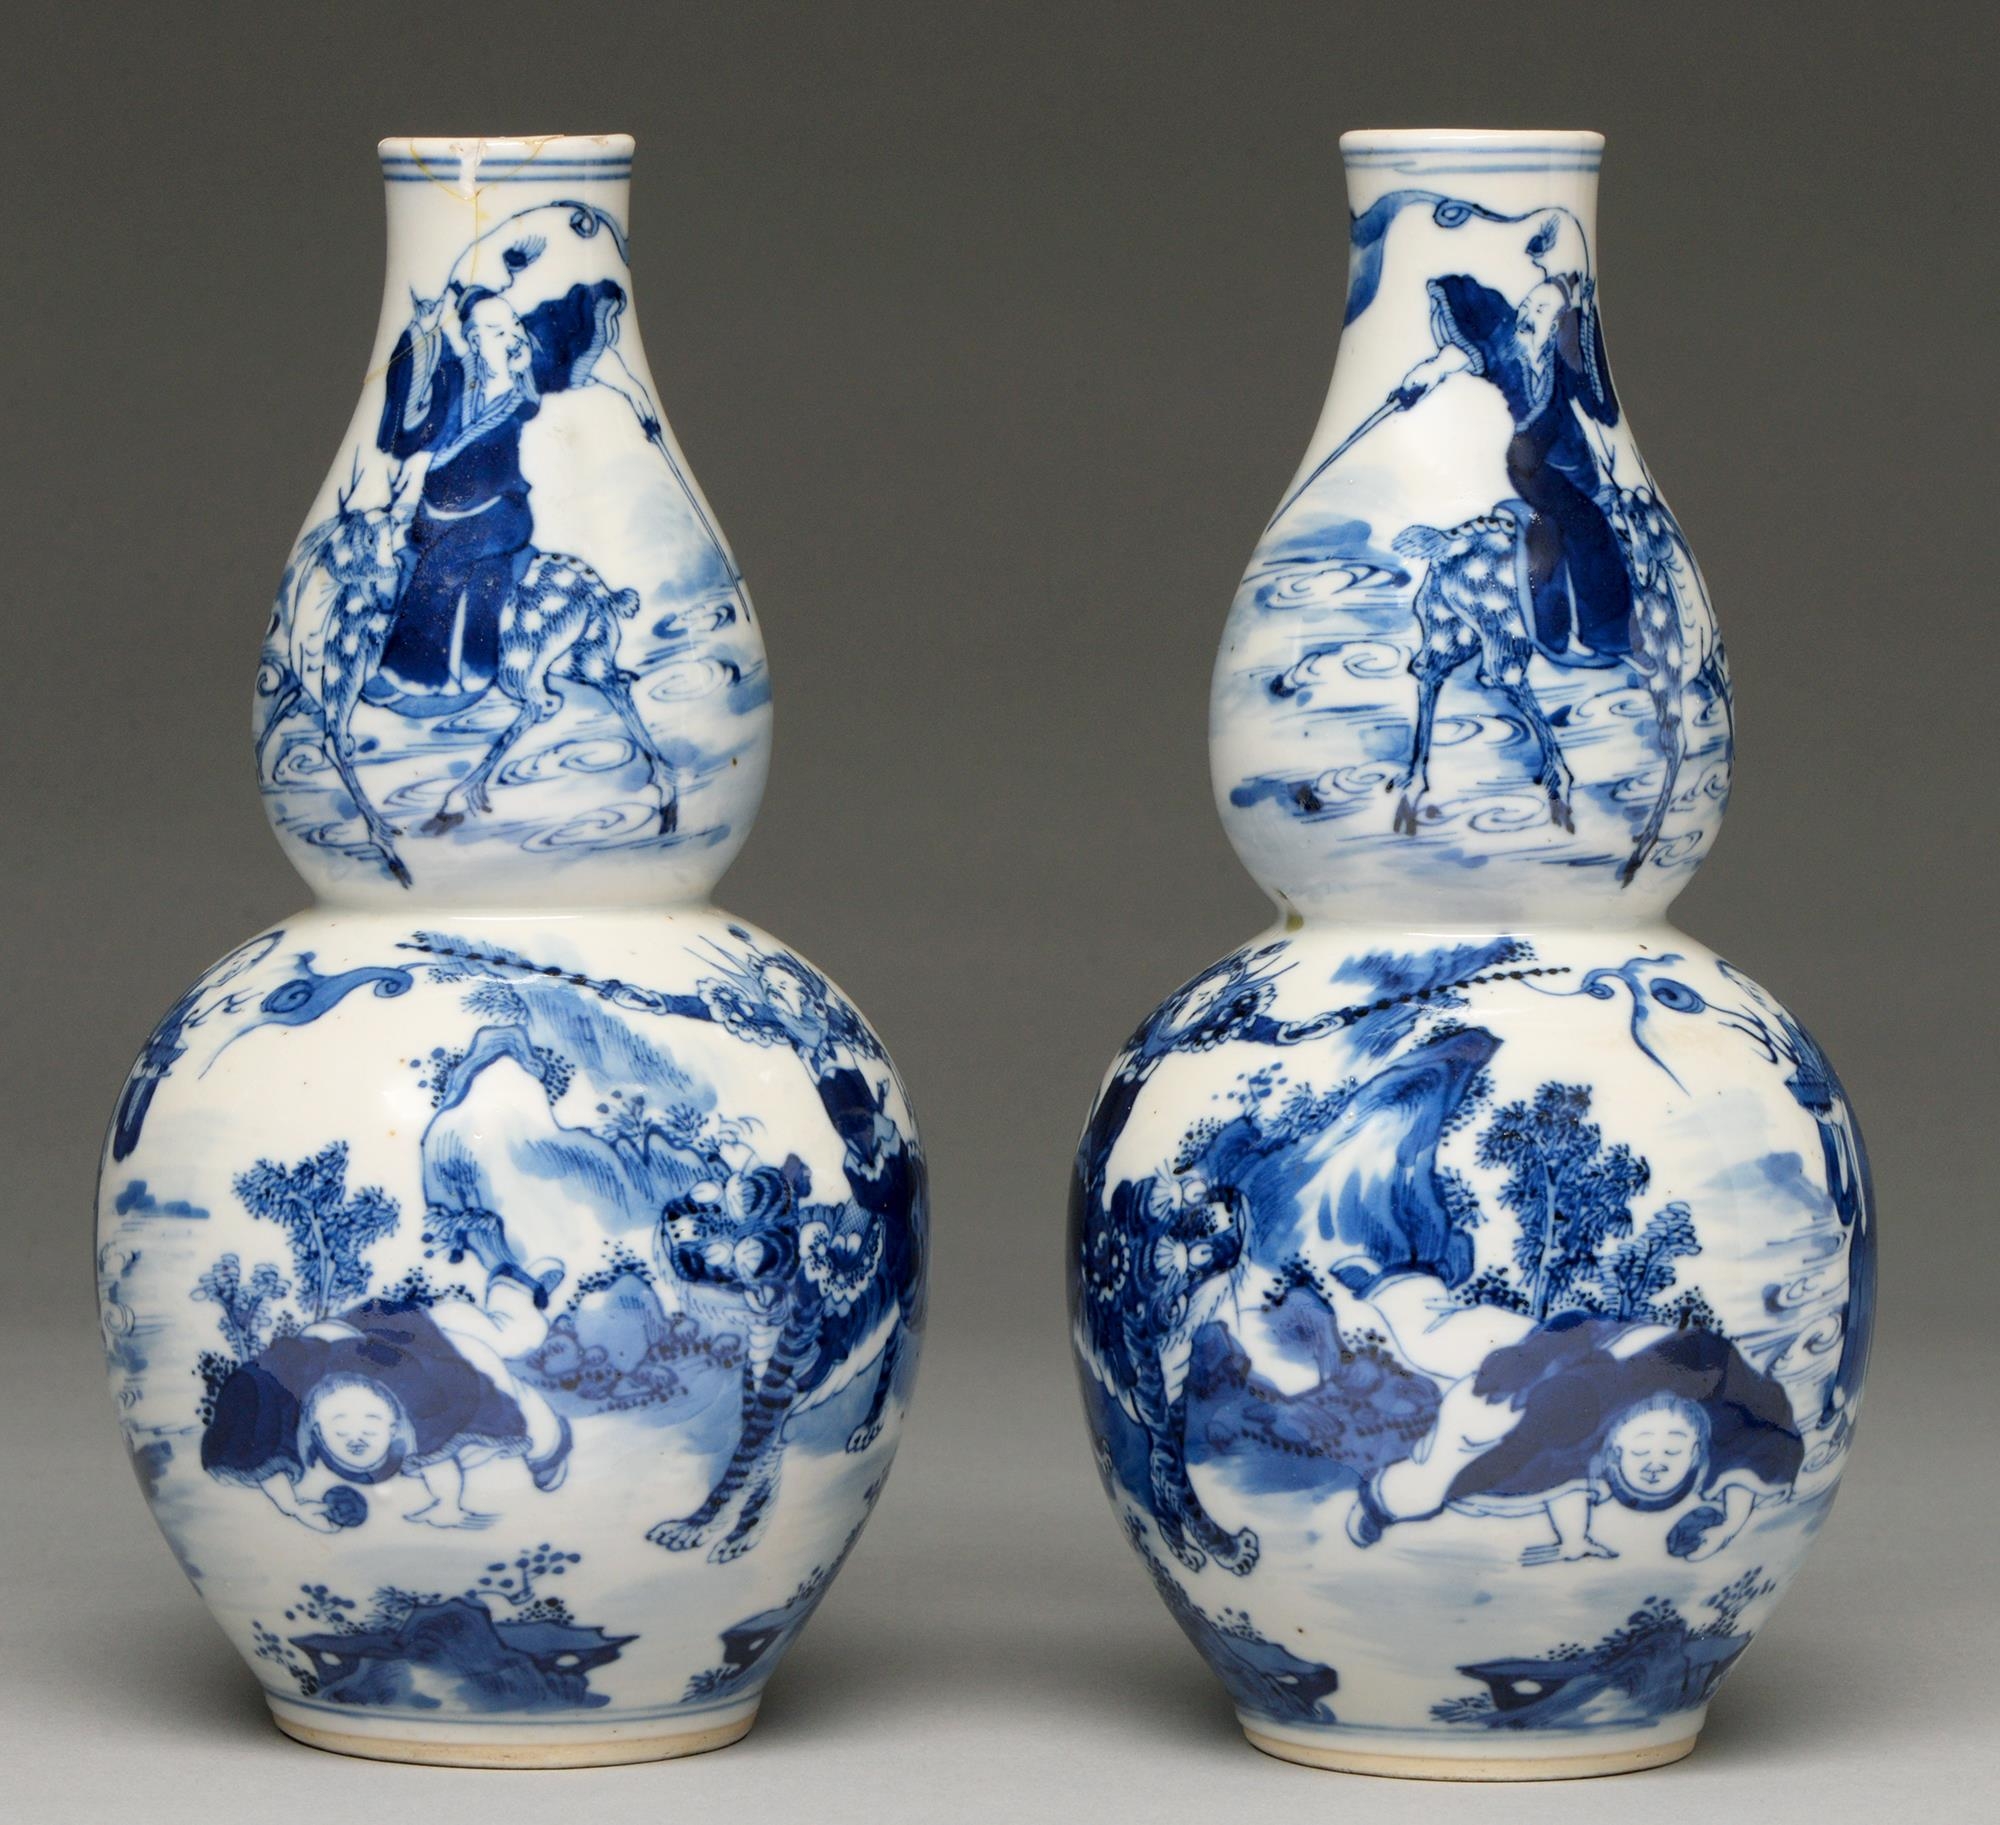 A pair of Chinese blue and white double gourd vases, 19th c, painted with figures including Zhao